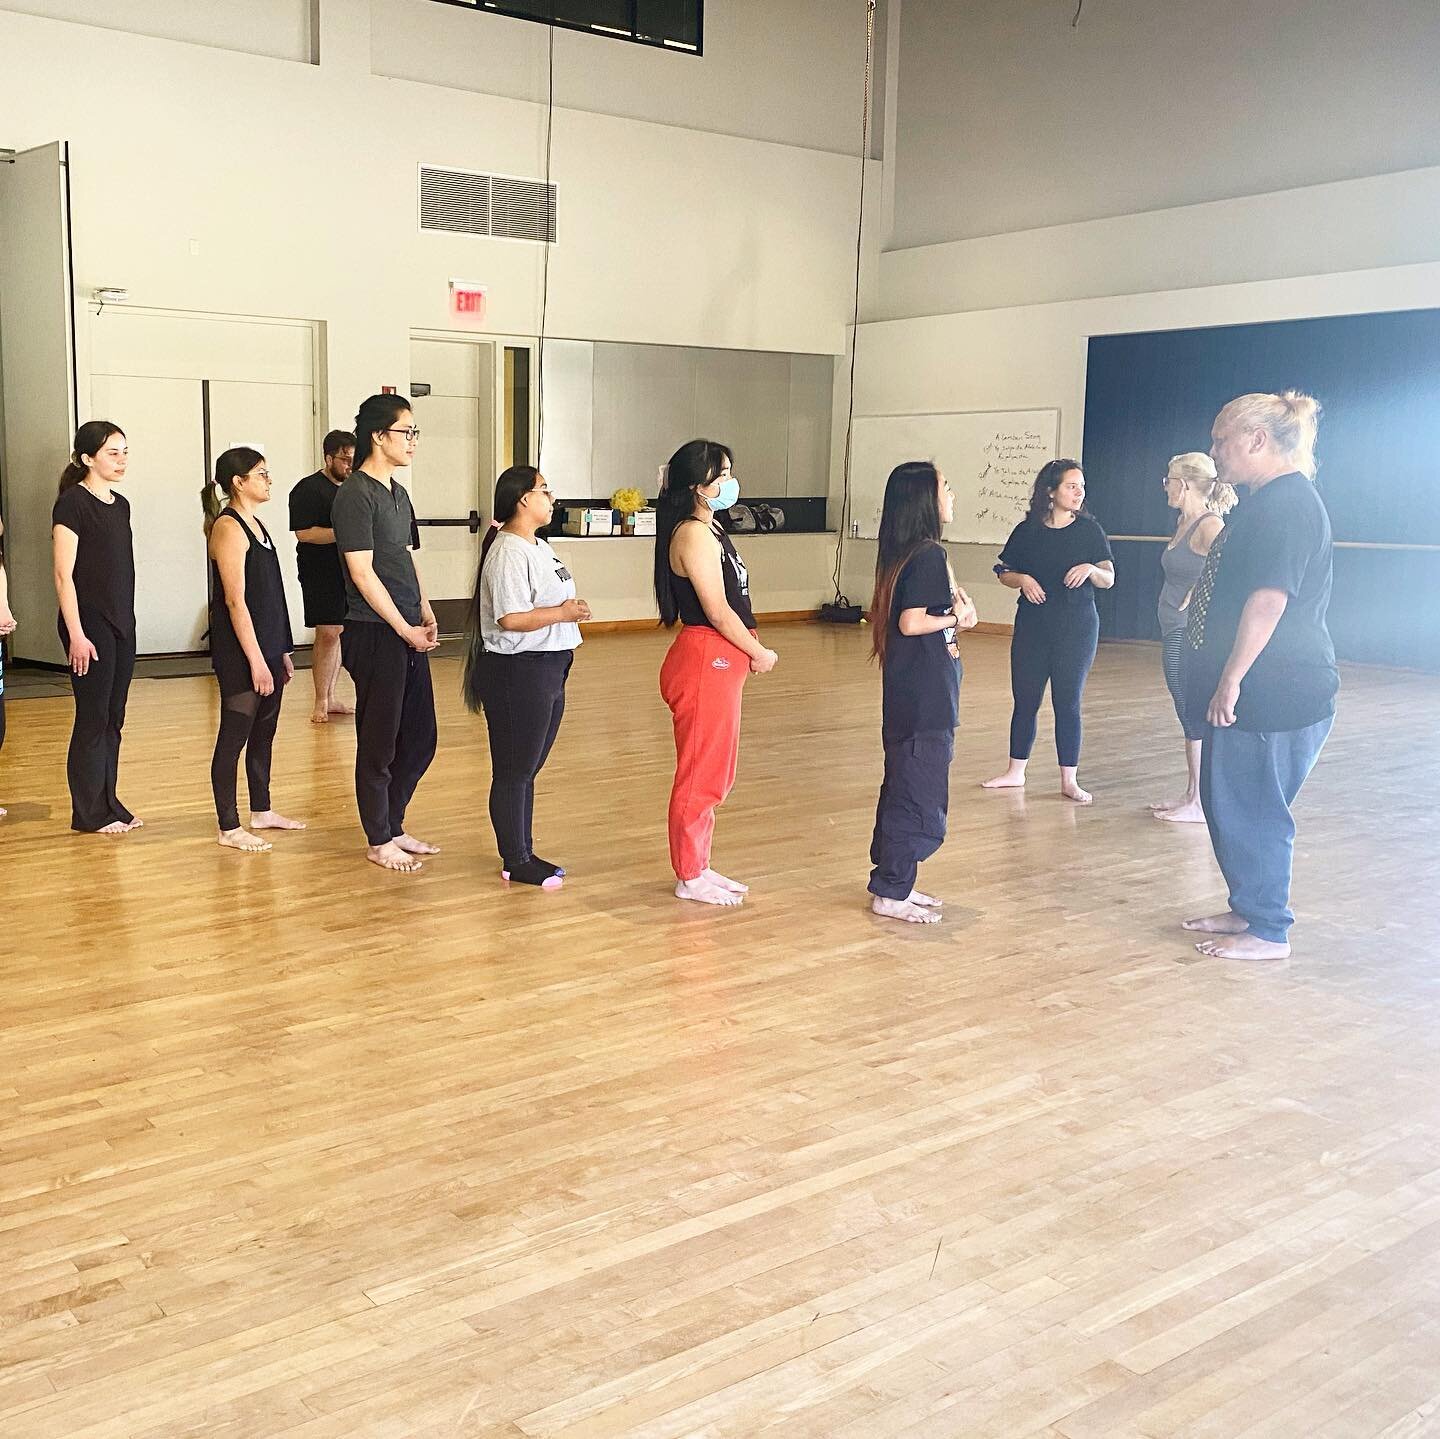 Earlier this month, @ucr_dance hosted the annual Indigenous Choreographers at Riverside Symposium, and through this, my class experienced a workshop with @jgrayjnr of @atamiradancecompany. Afterwards followed a moving performance of eulogy and rememb